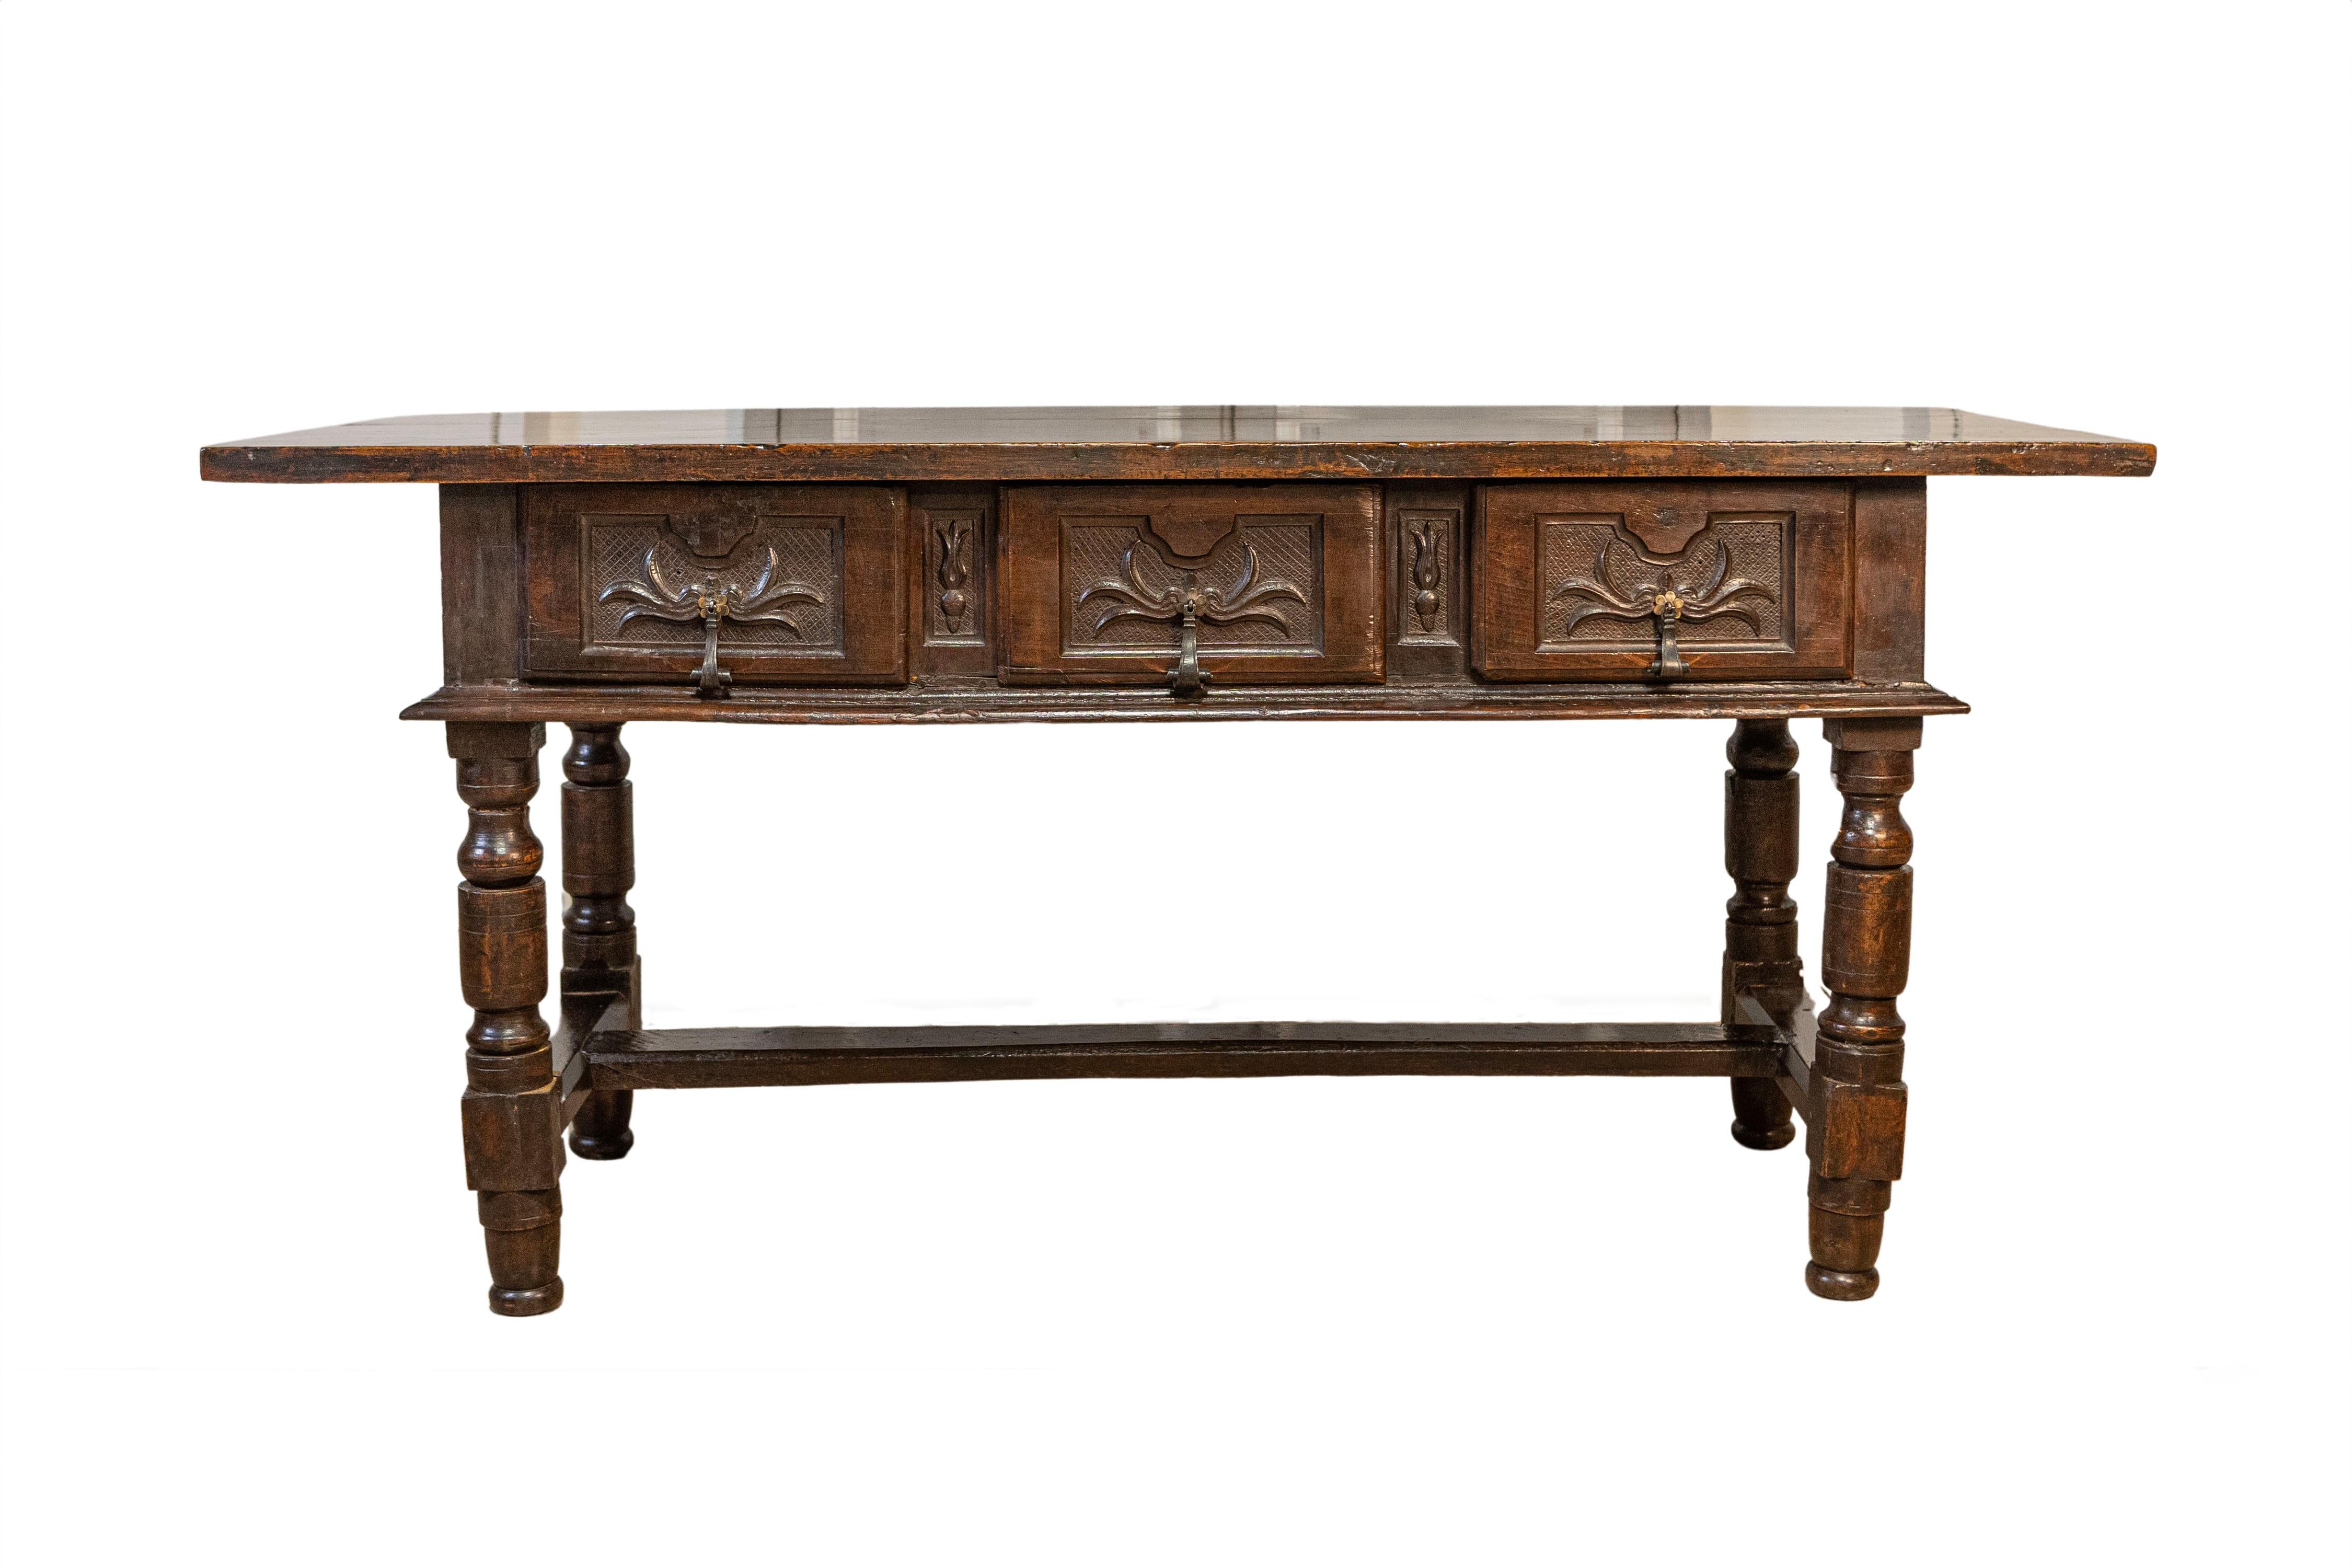 Spanish Baroque 17th Century Walnut Table with Carved Drawers and Turned Legs For Sale 1